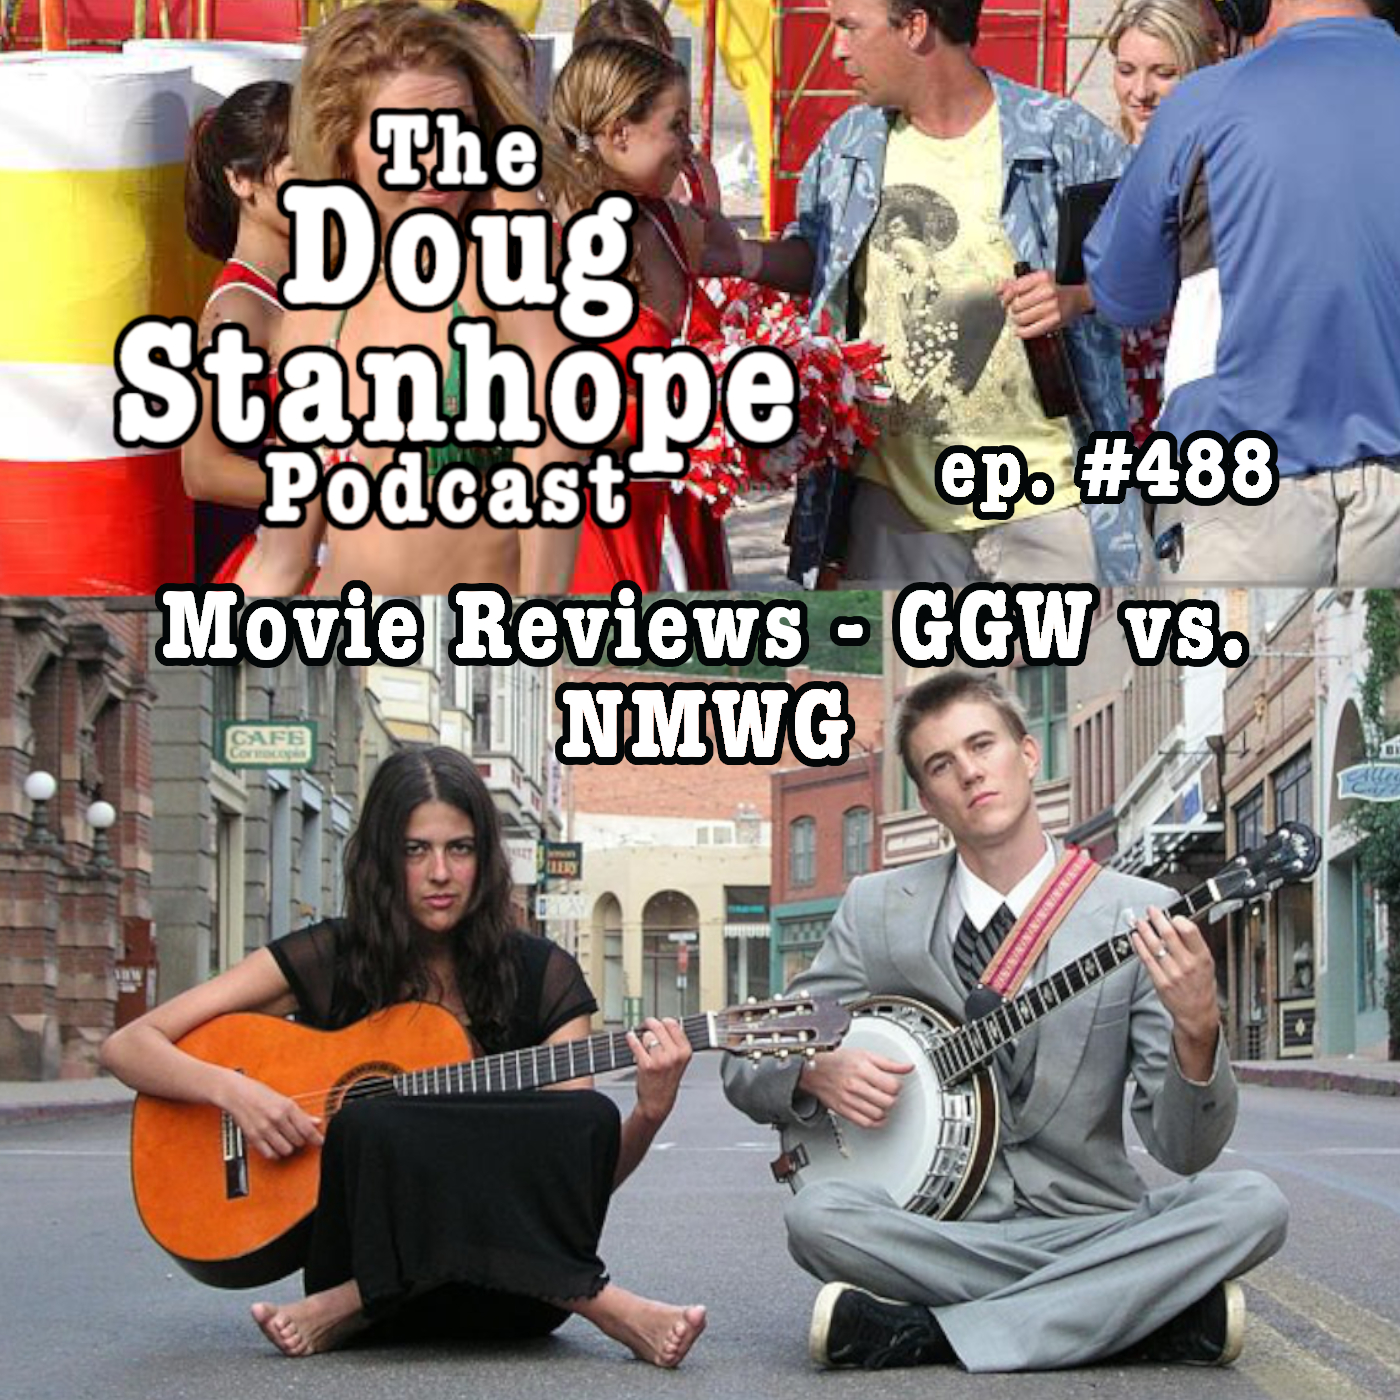 DSP Ep. 488: ”Movie Reviews - GGW vs. NMWG”